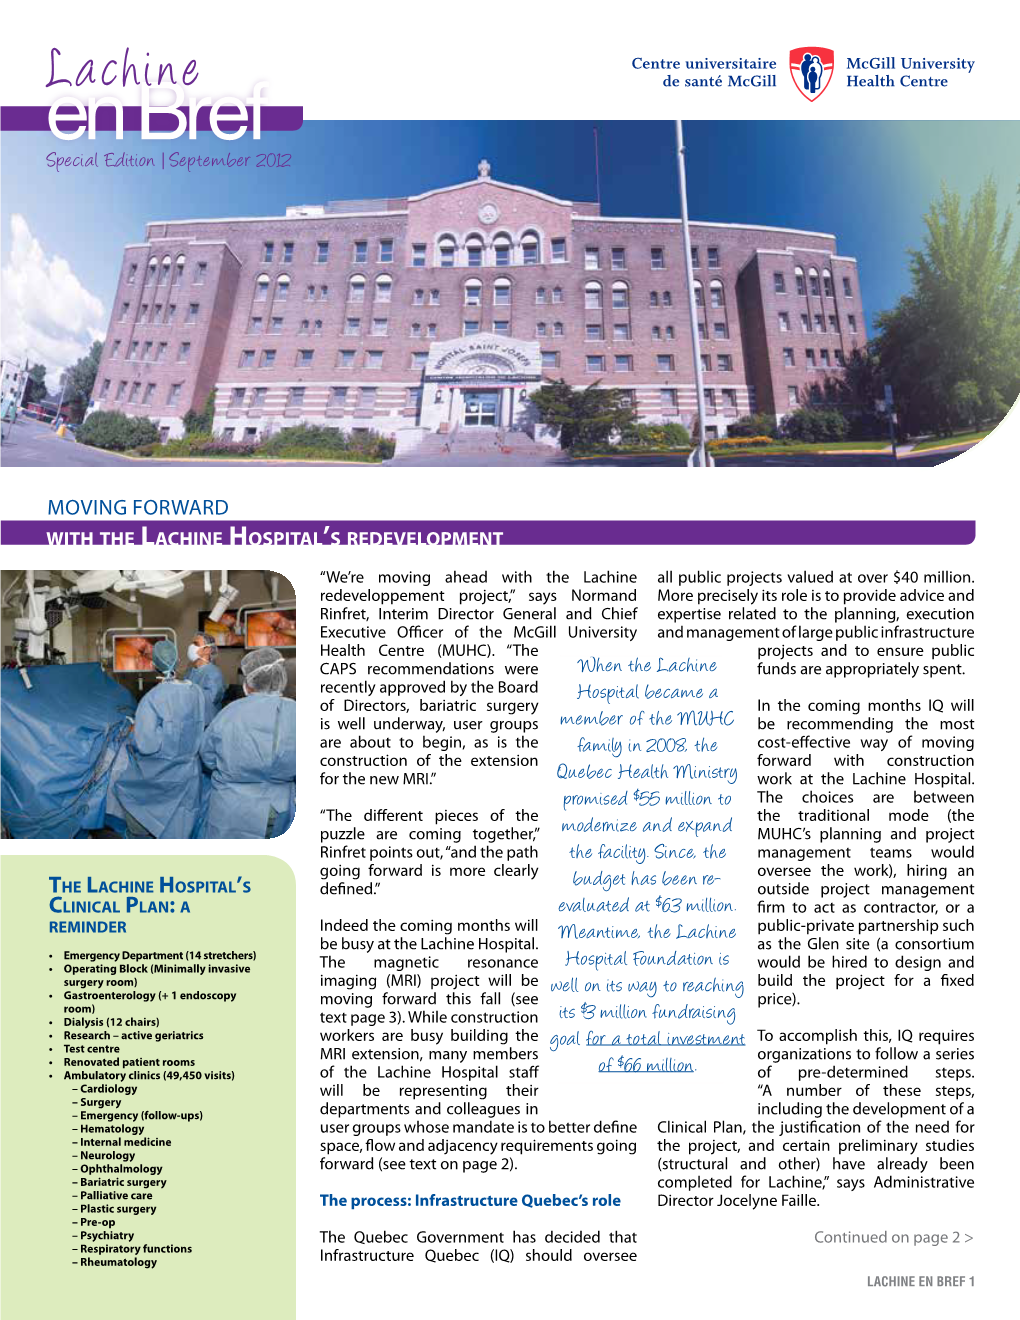 Special Edition | September 2012 When the Lachine Hospital Became